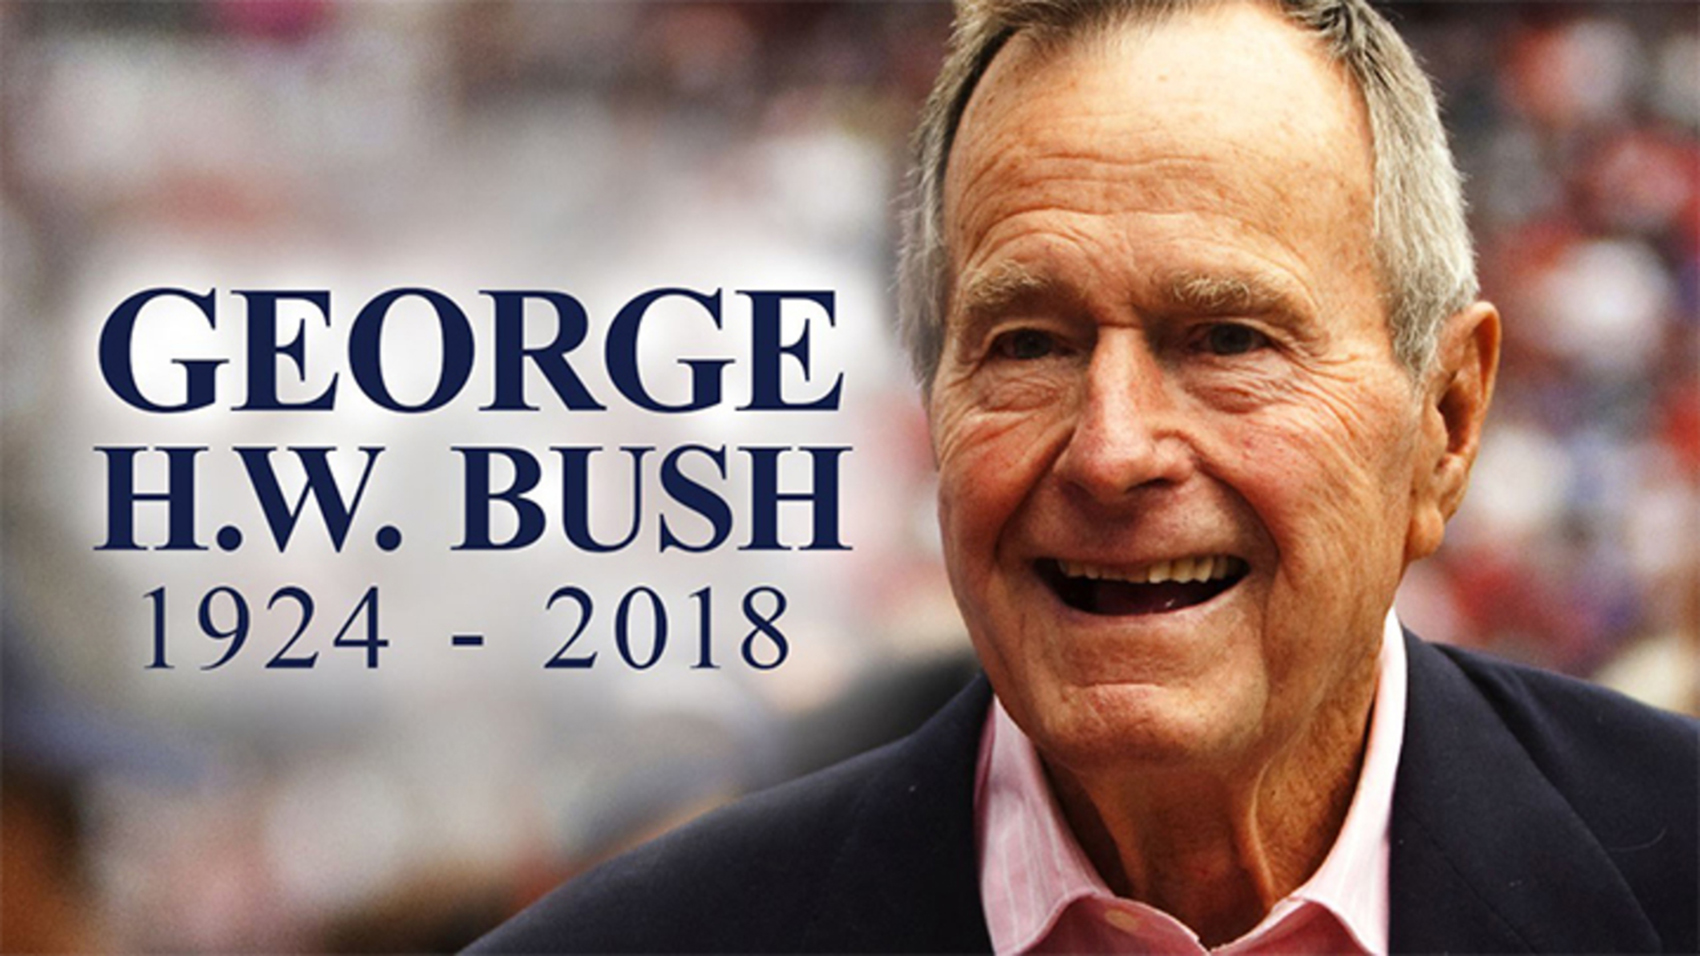 In sharing her thoughts on the late President George H.W. Bush, Delaware State University President Wilma Mishoe noted that most current students on campus were not yet born during the 1989-1993 years of his presidency.